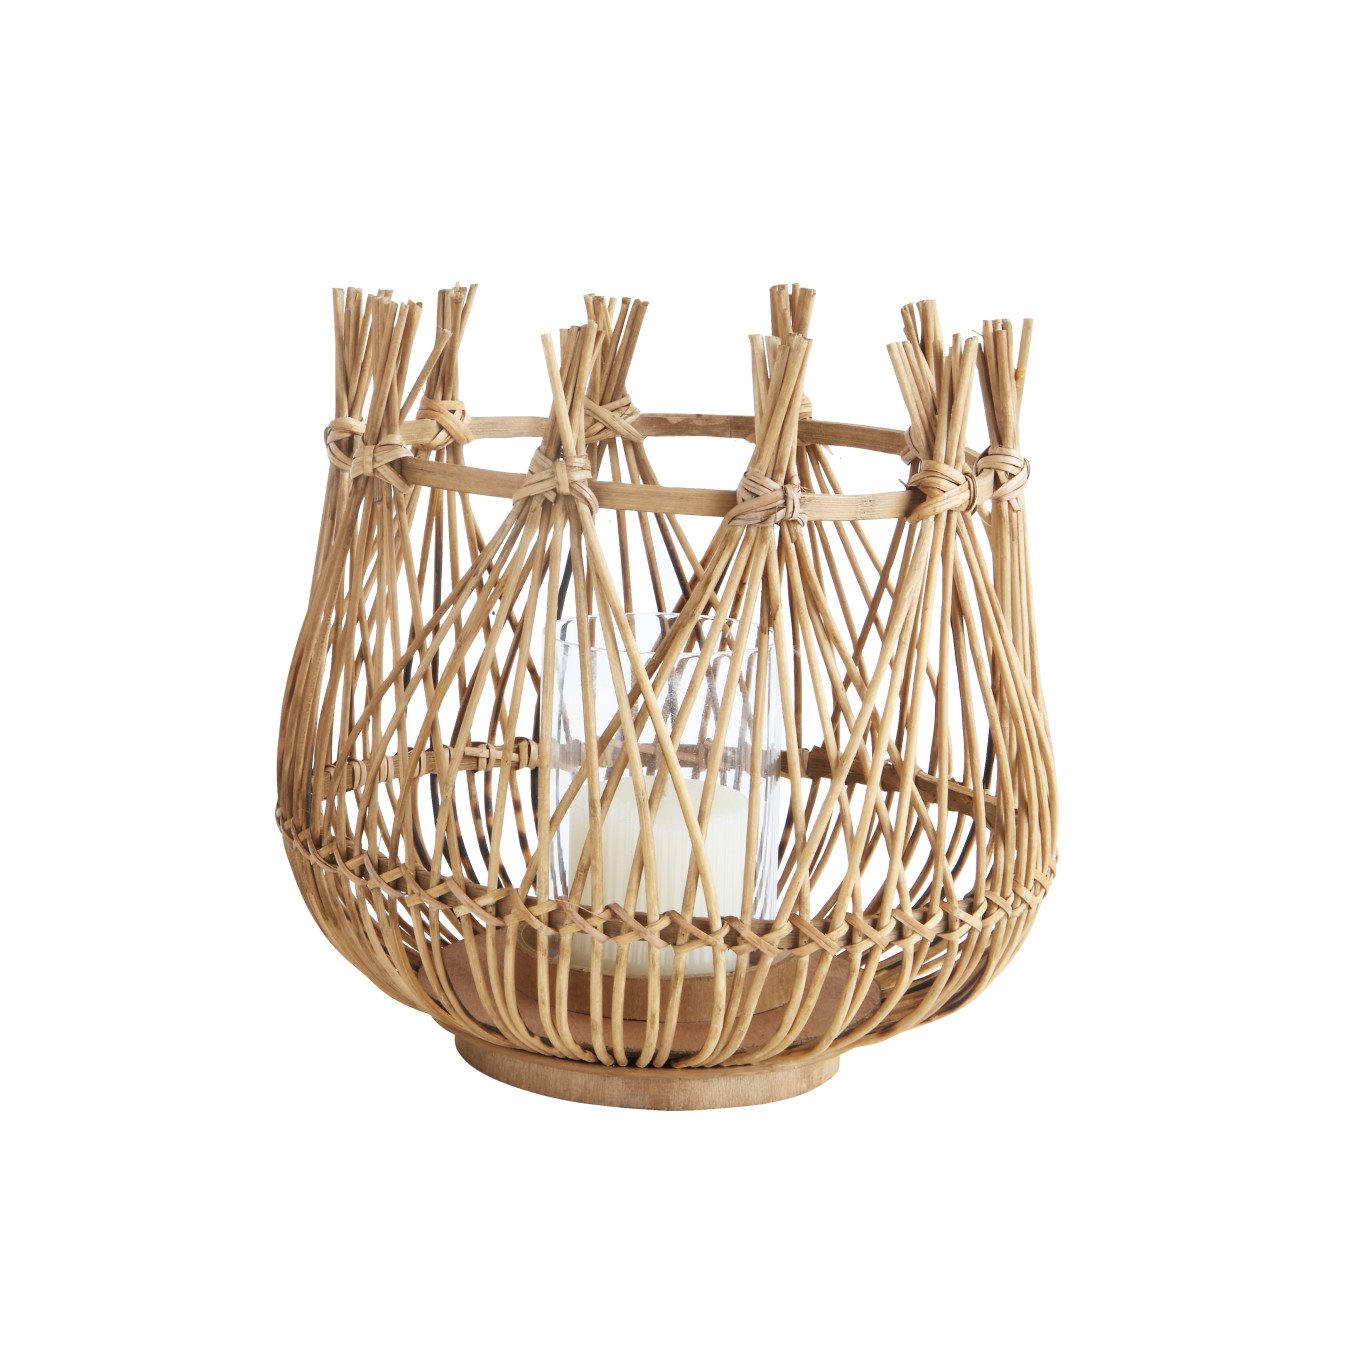 Small Round Bamboo Candleholder with Glass Insert